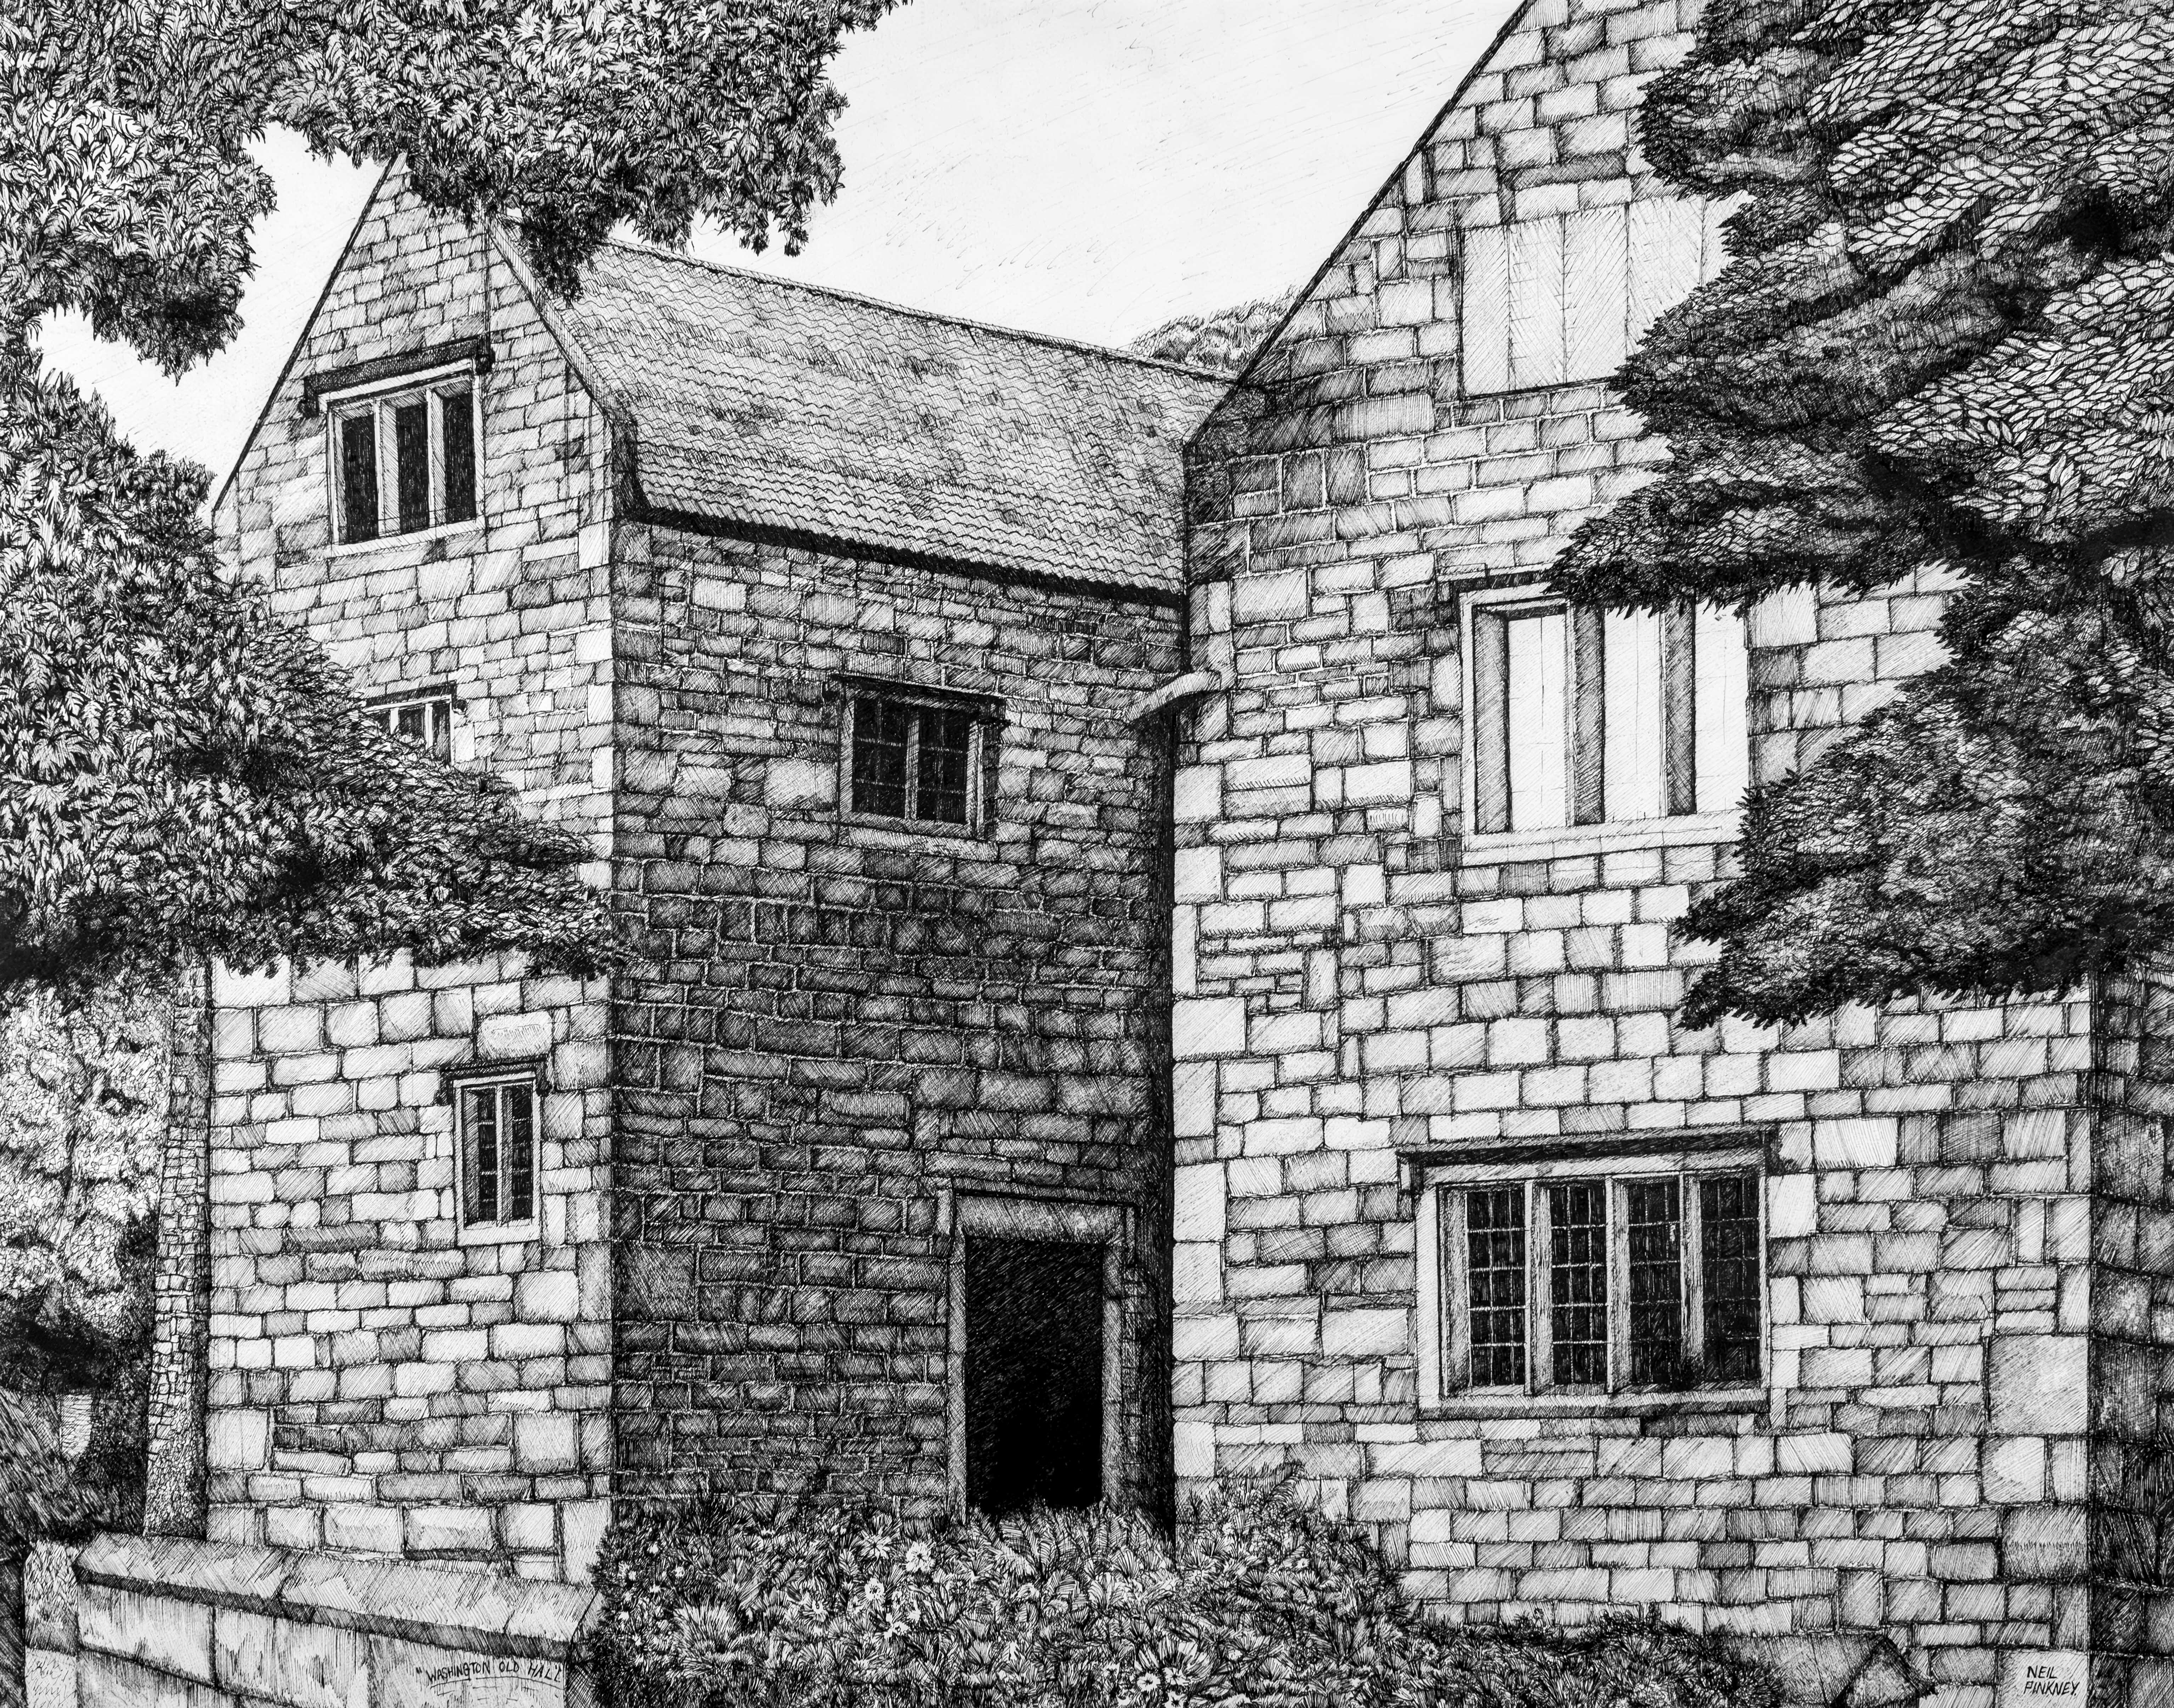 A child's pencil drawing of a building